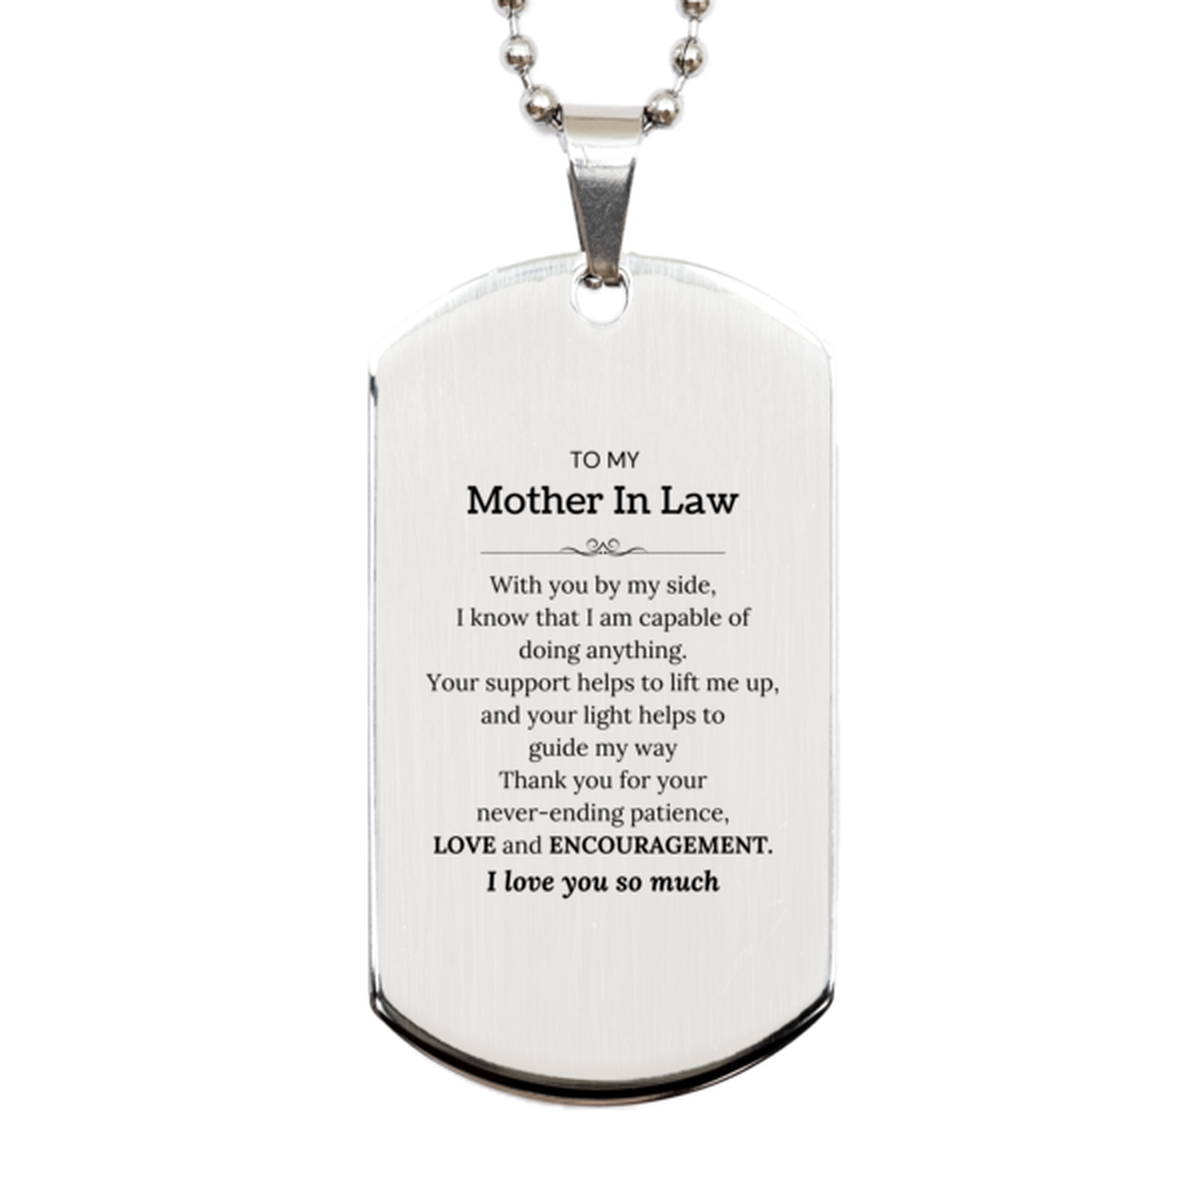 Appreciation Mother In Law Silver Dog Tag Gifts, To My Mother In Law Birthday Christmas Wedding Keepsake Gifts for Mother In Law With you by my side, I know that I am capable of doing anything. I love you so much